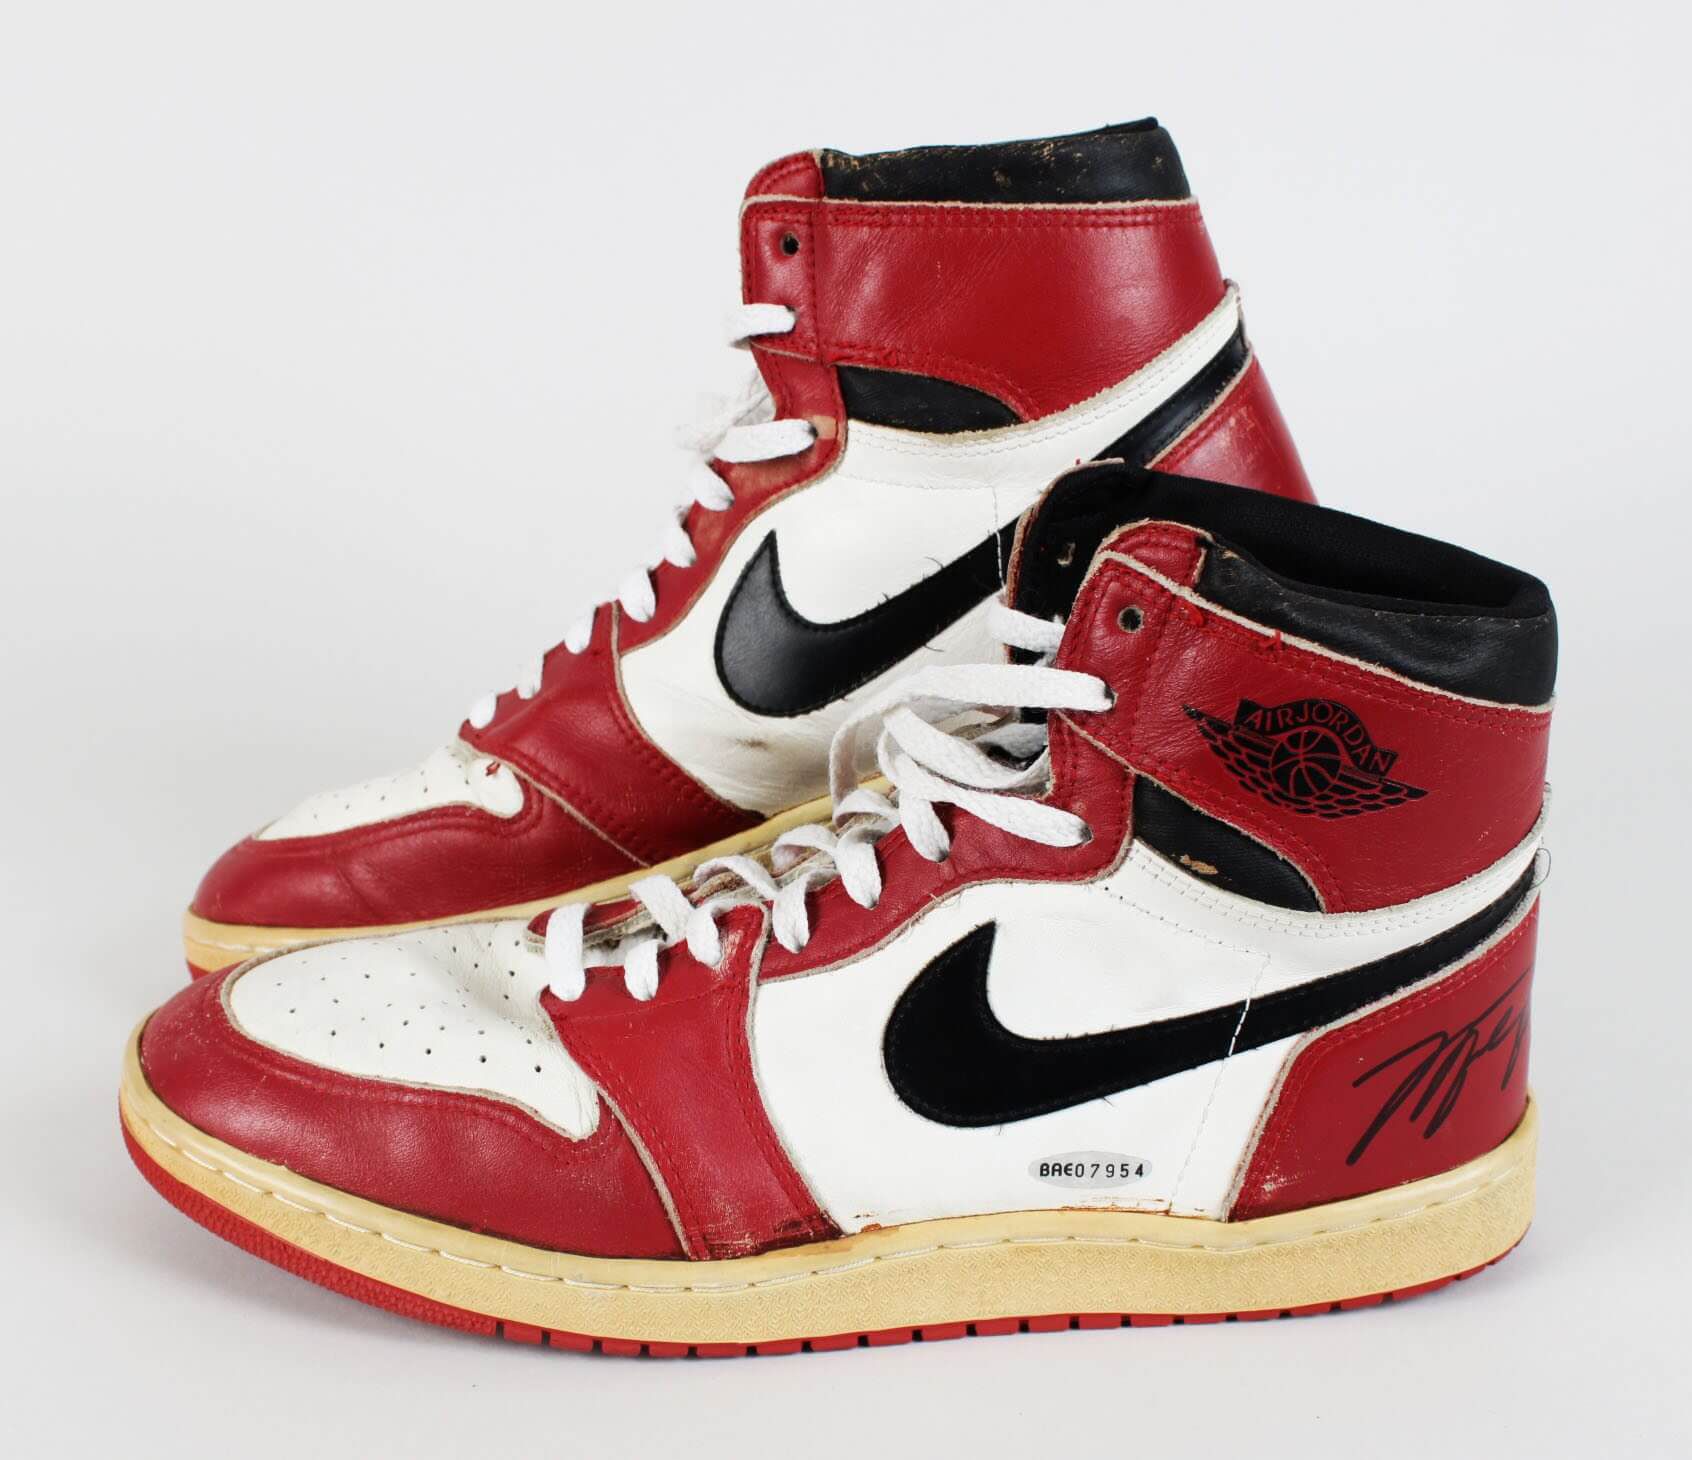 Top Ten Most Expensive Shoes by Nike - Edudwar